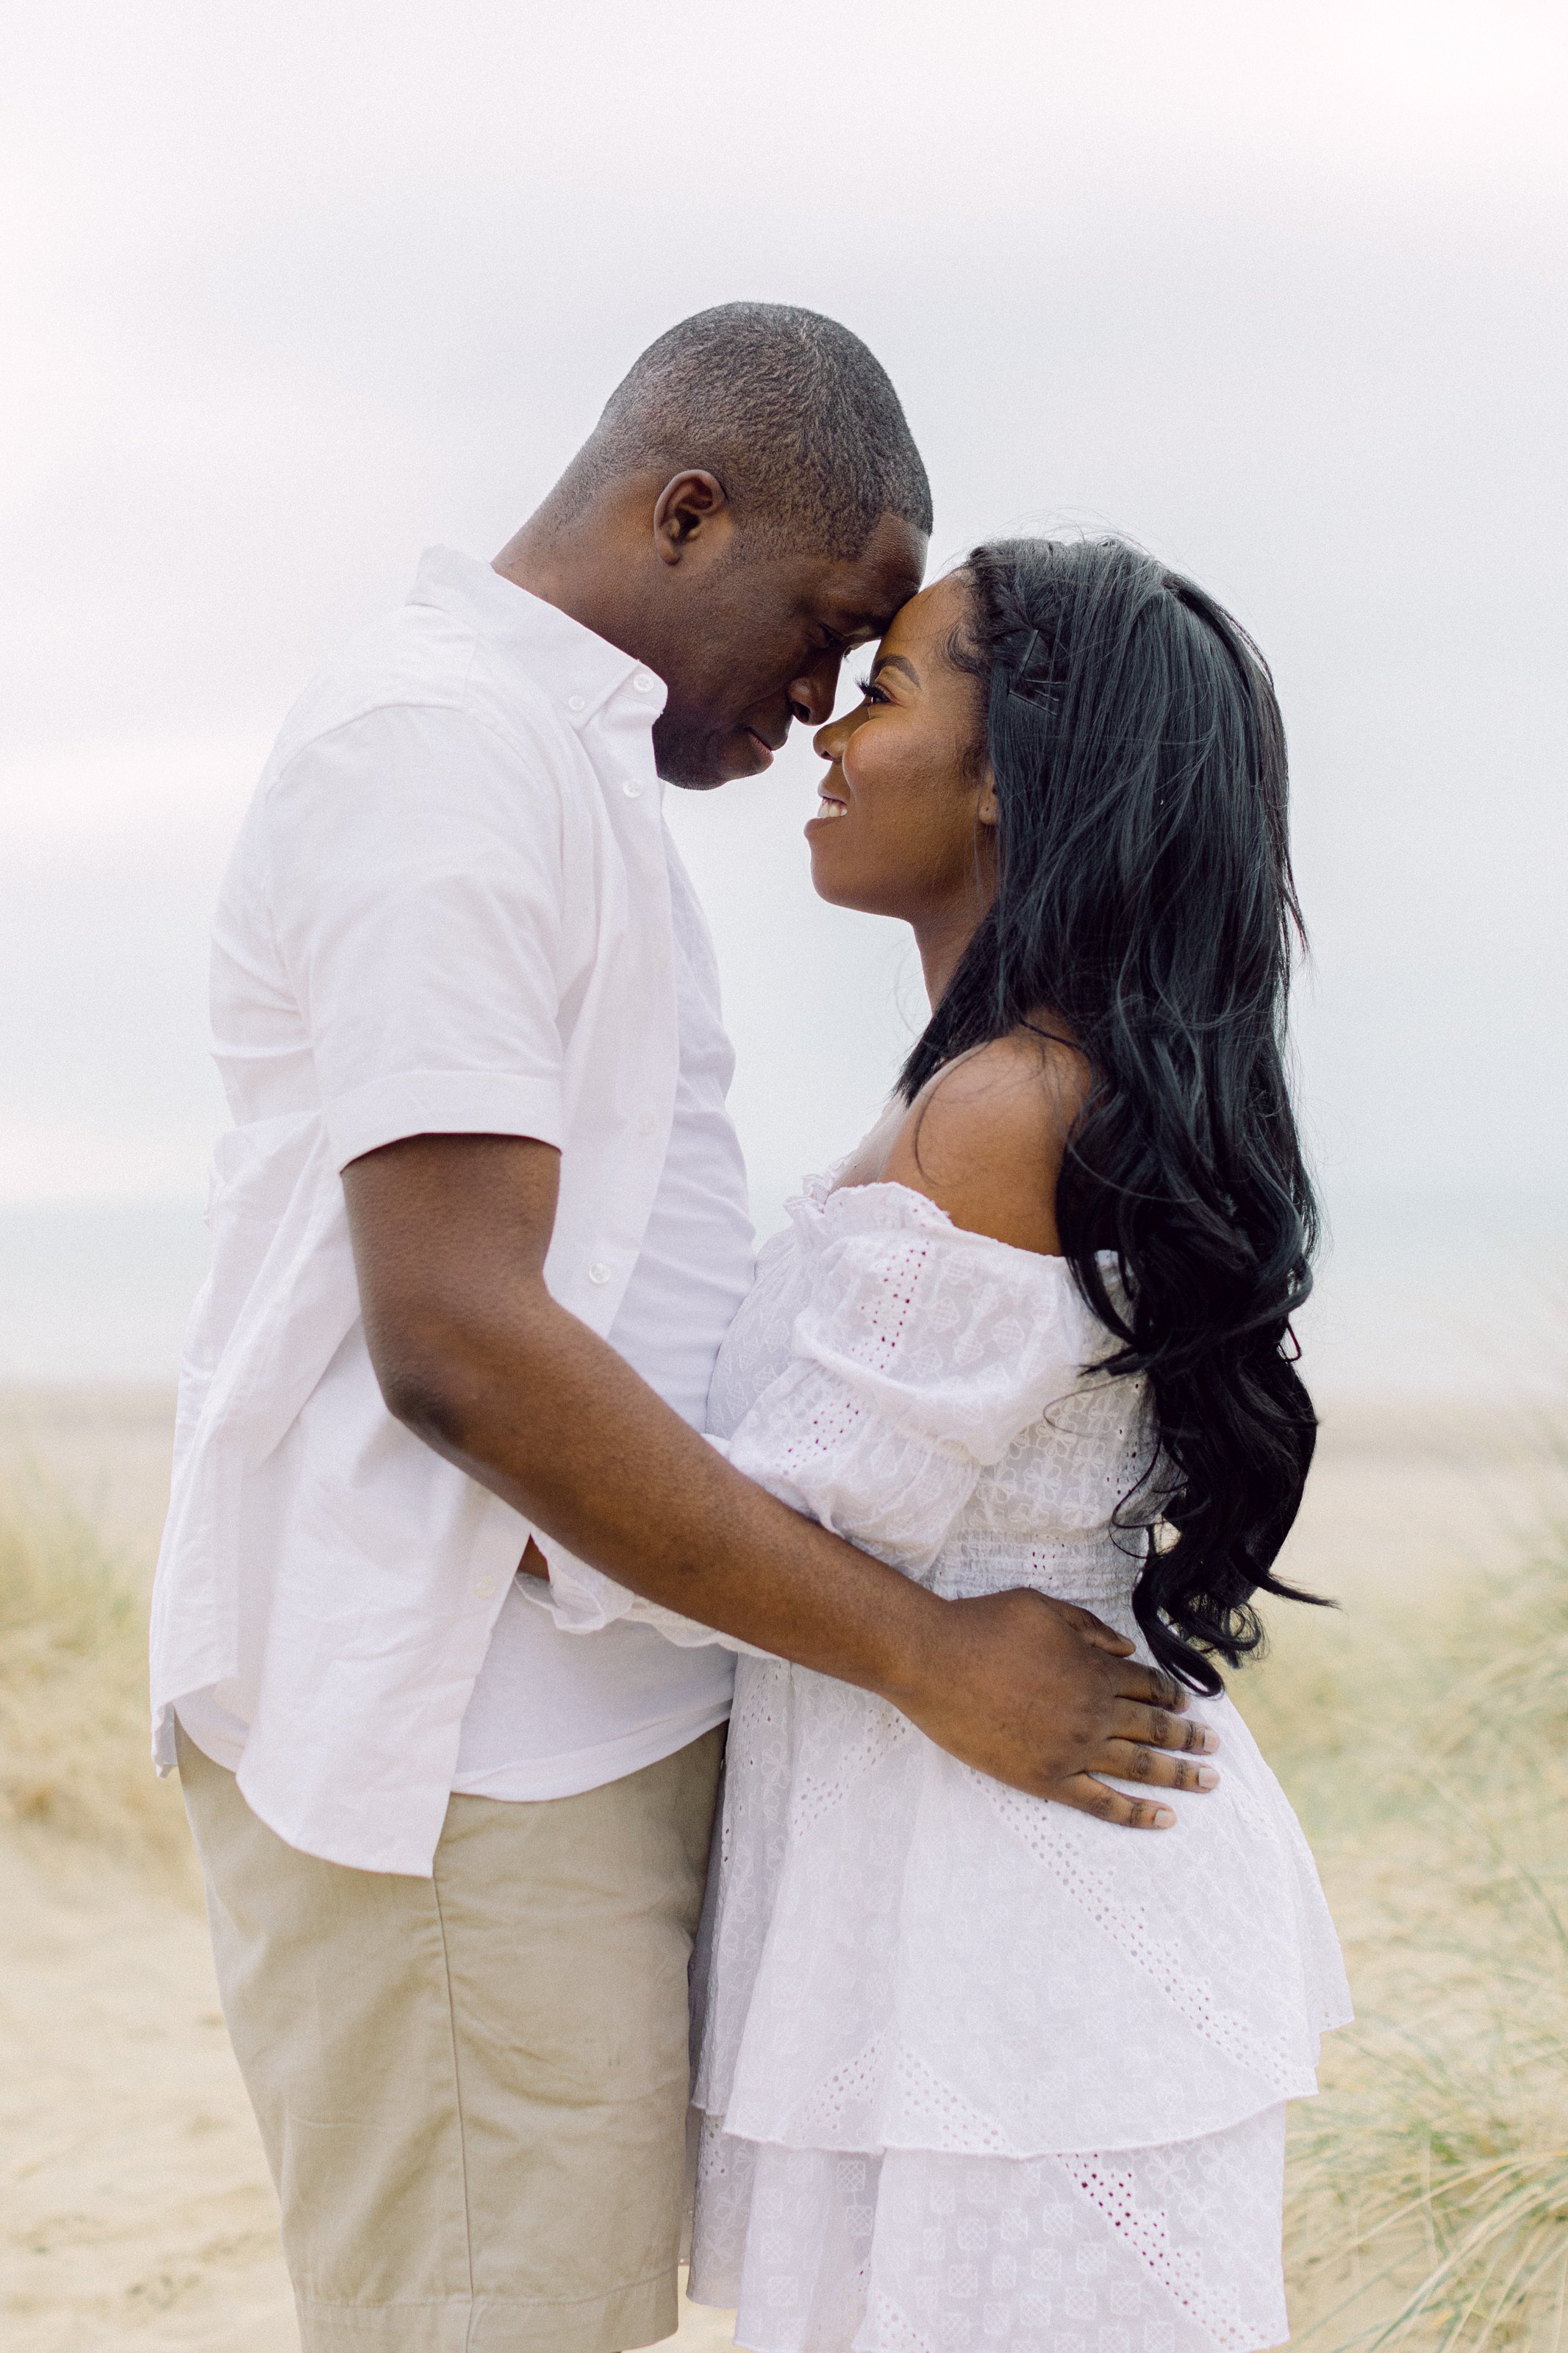  Sussex wedding photographer engagement shoot at camber sands 